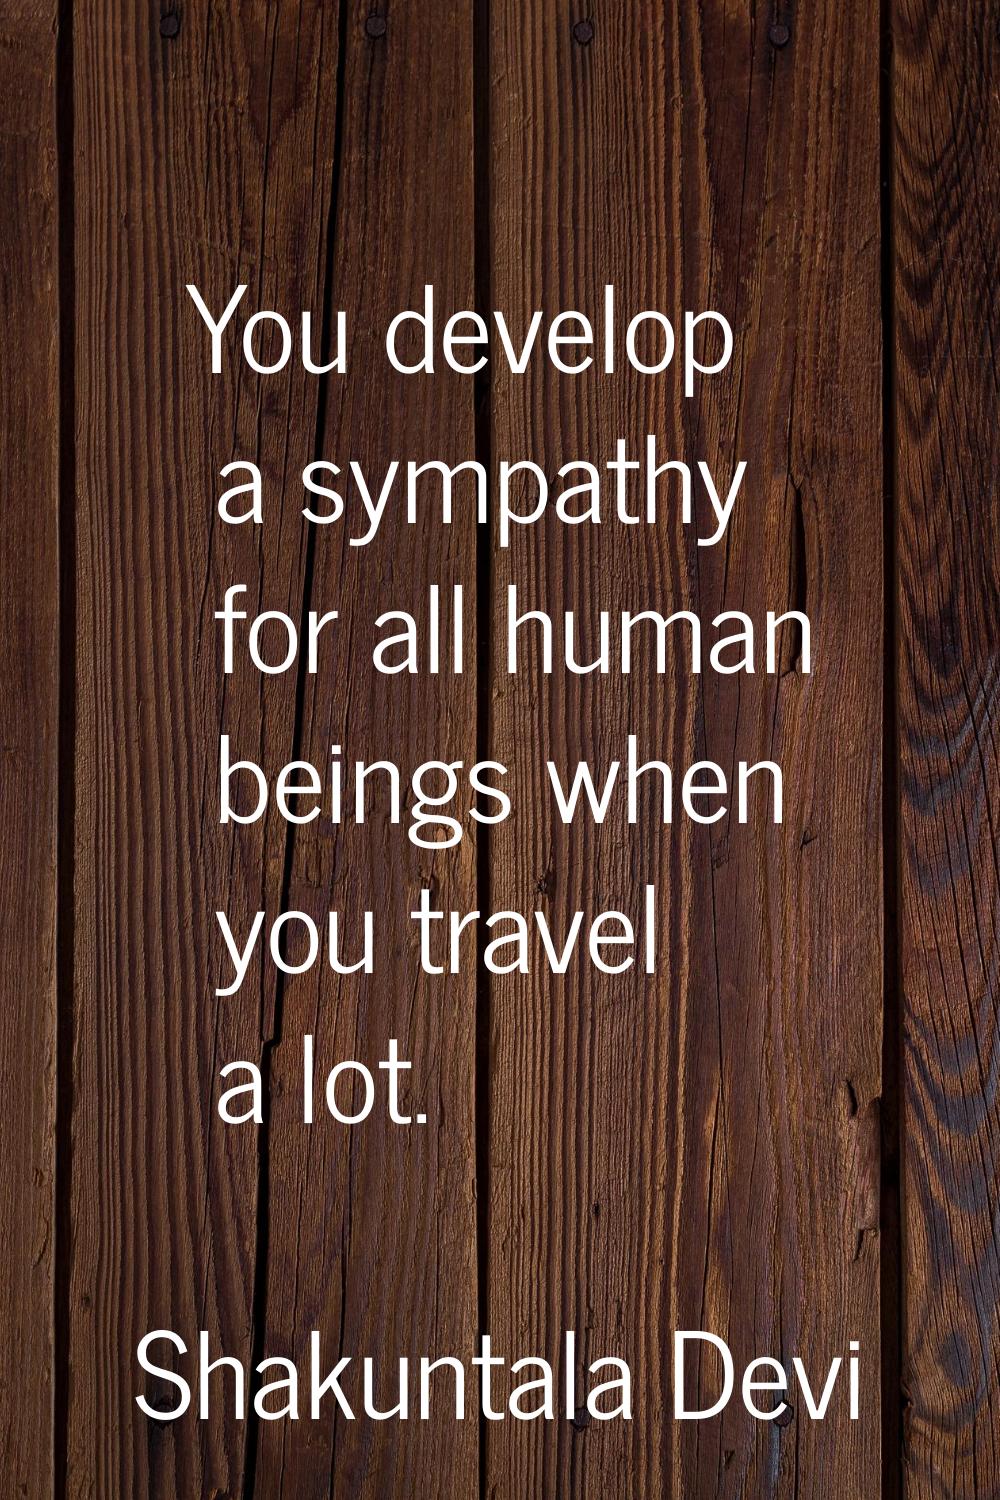 You develop a sympathy for all human beings when you travel a lot.